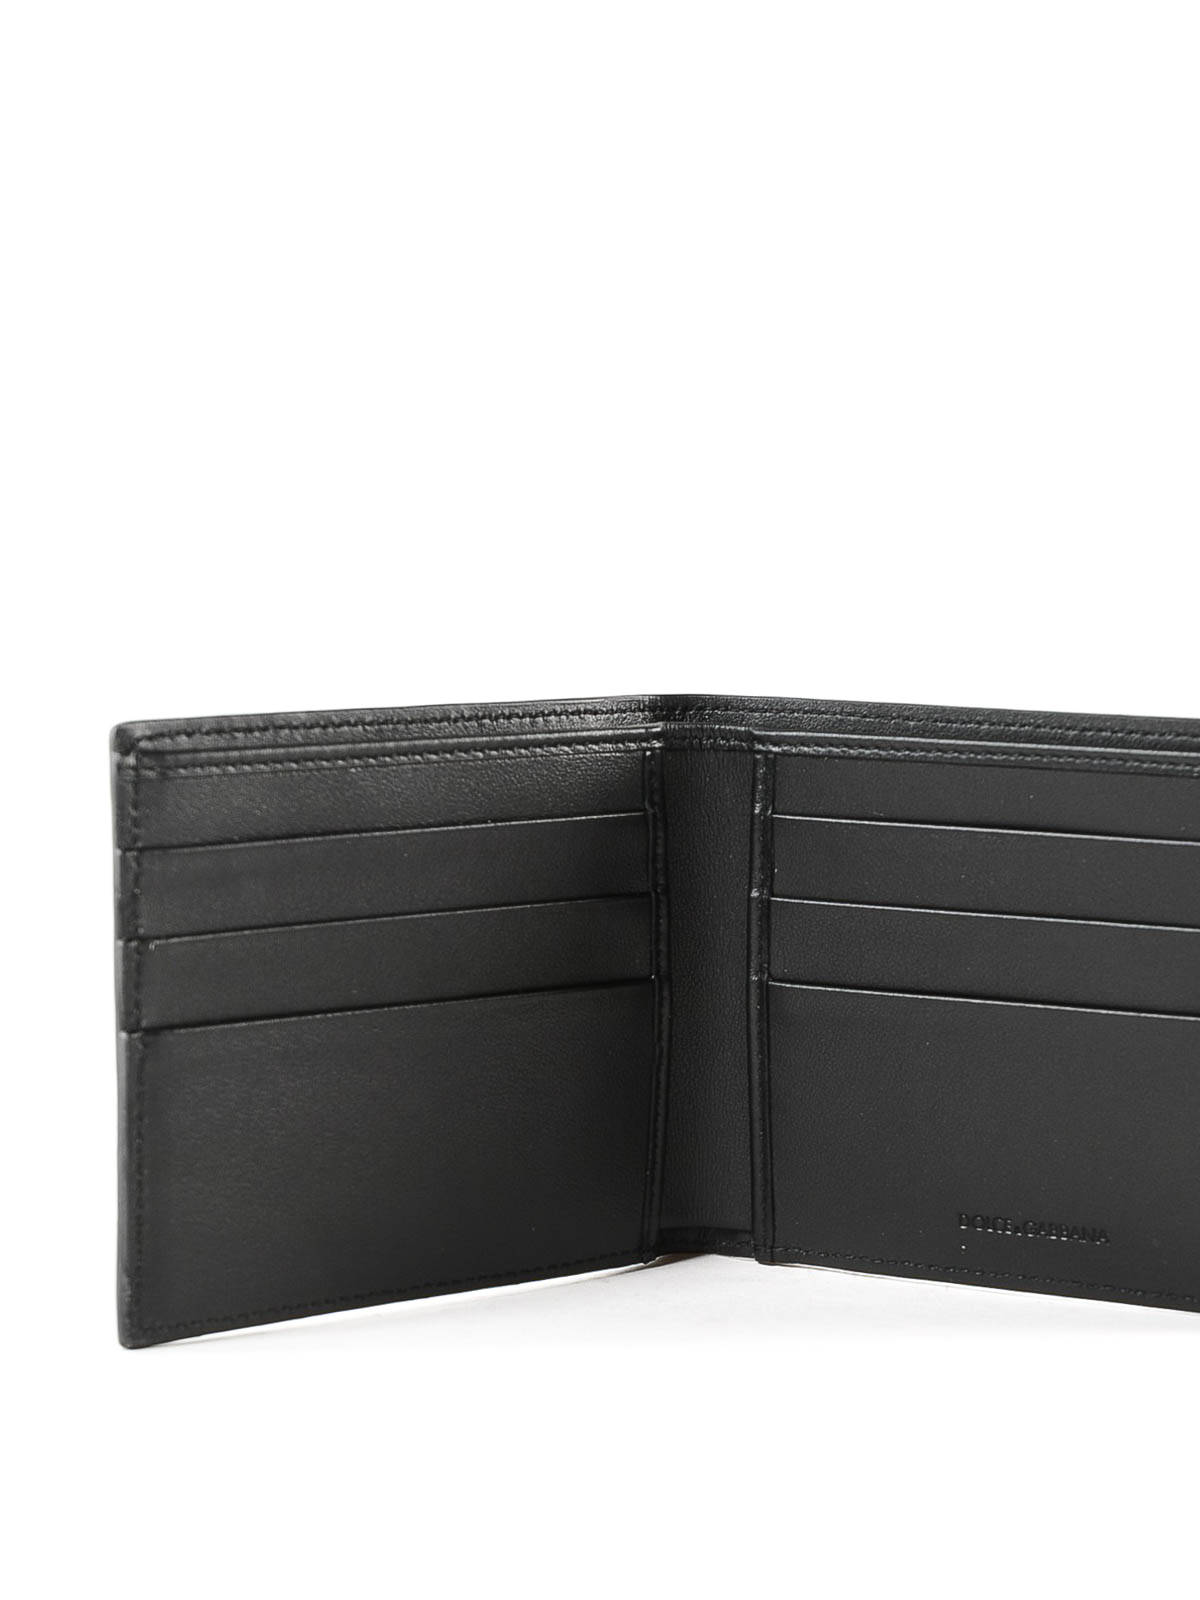 Burberry Embossed Leather Bifold Wallet Grey in Calfskin Leather - US